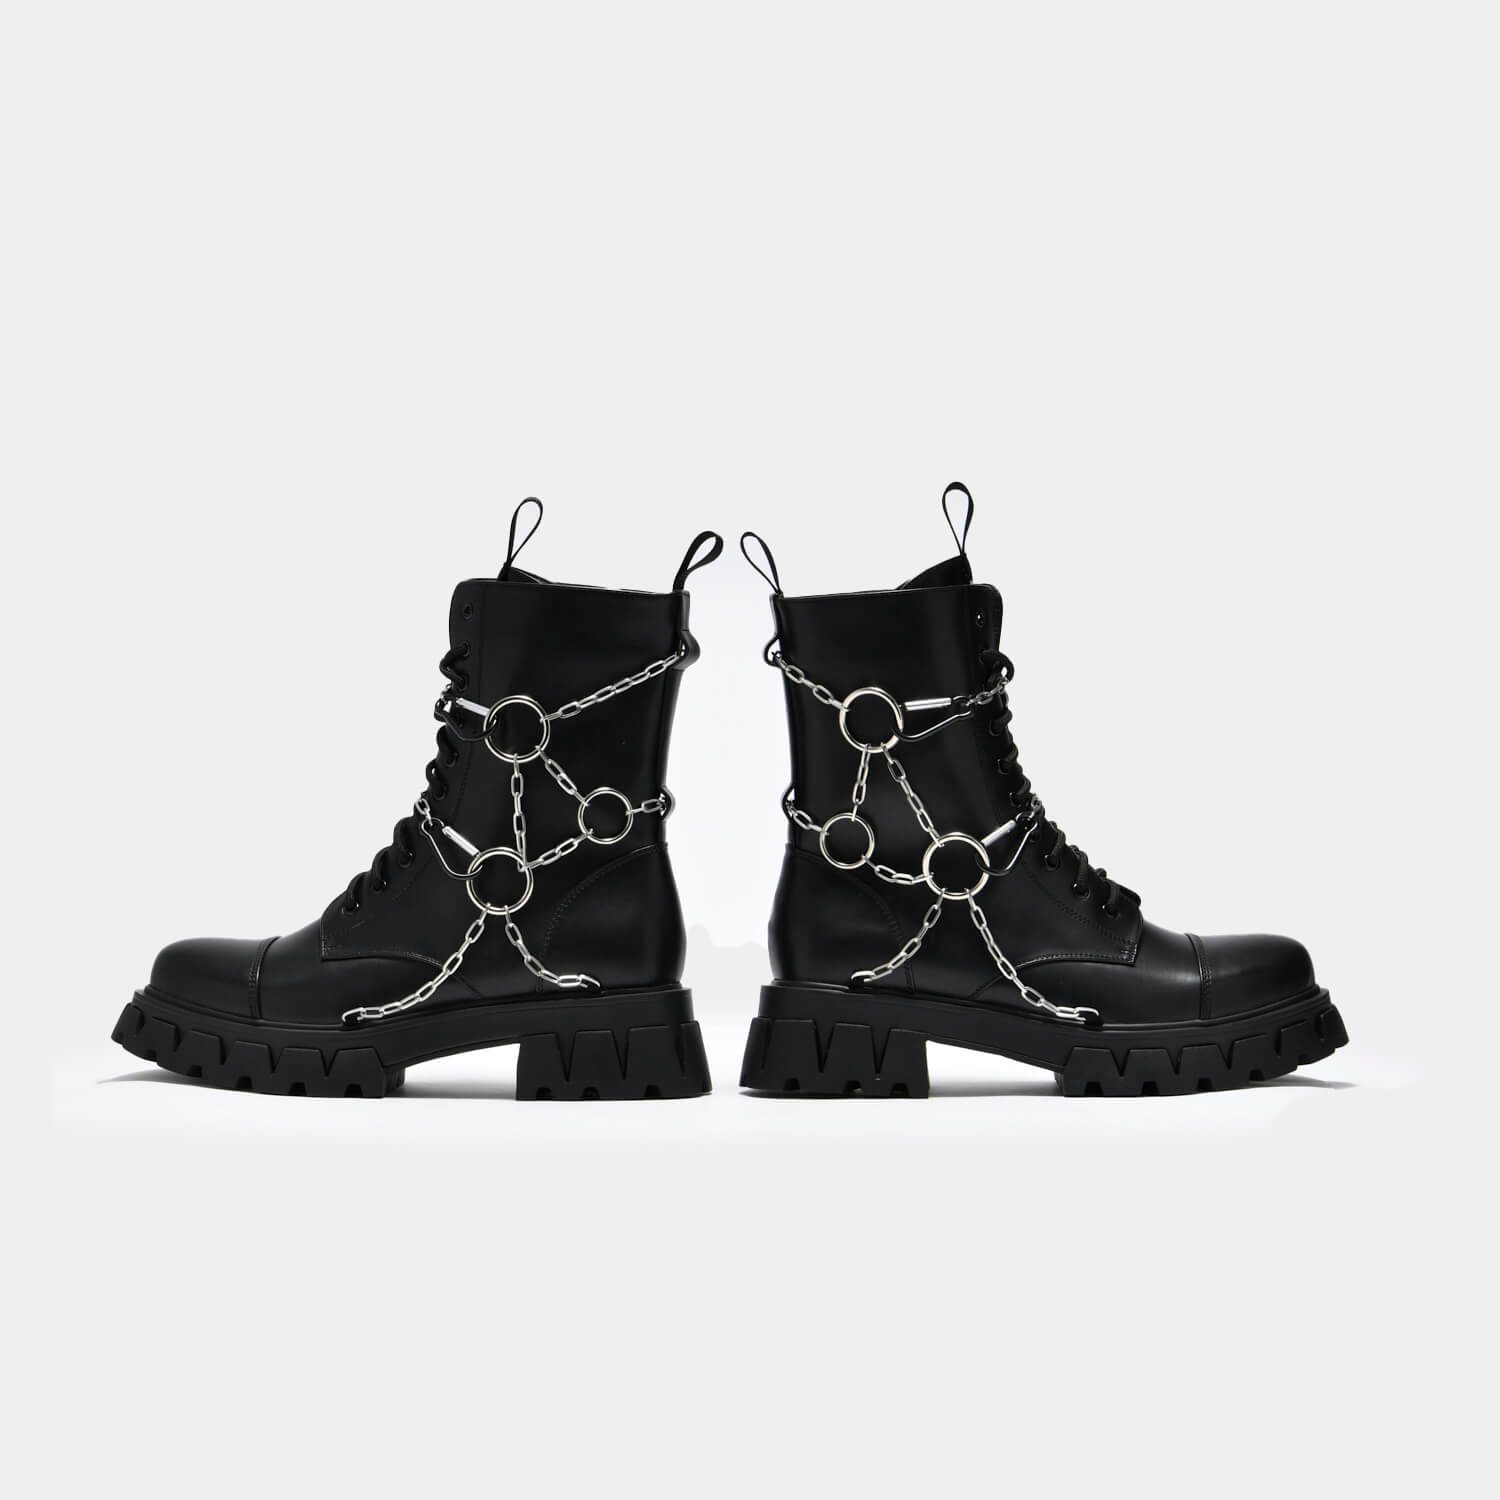 Cyrus Chain Boots - Ankle Boots - KOI Footwear - Black - Side Detail View